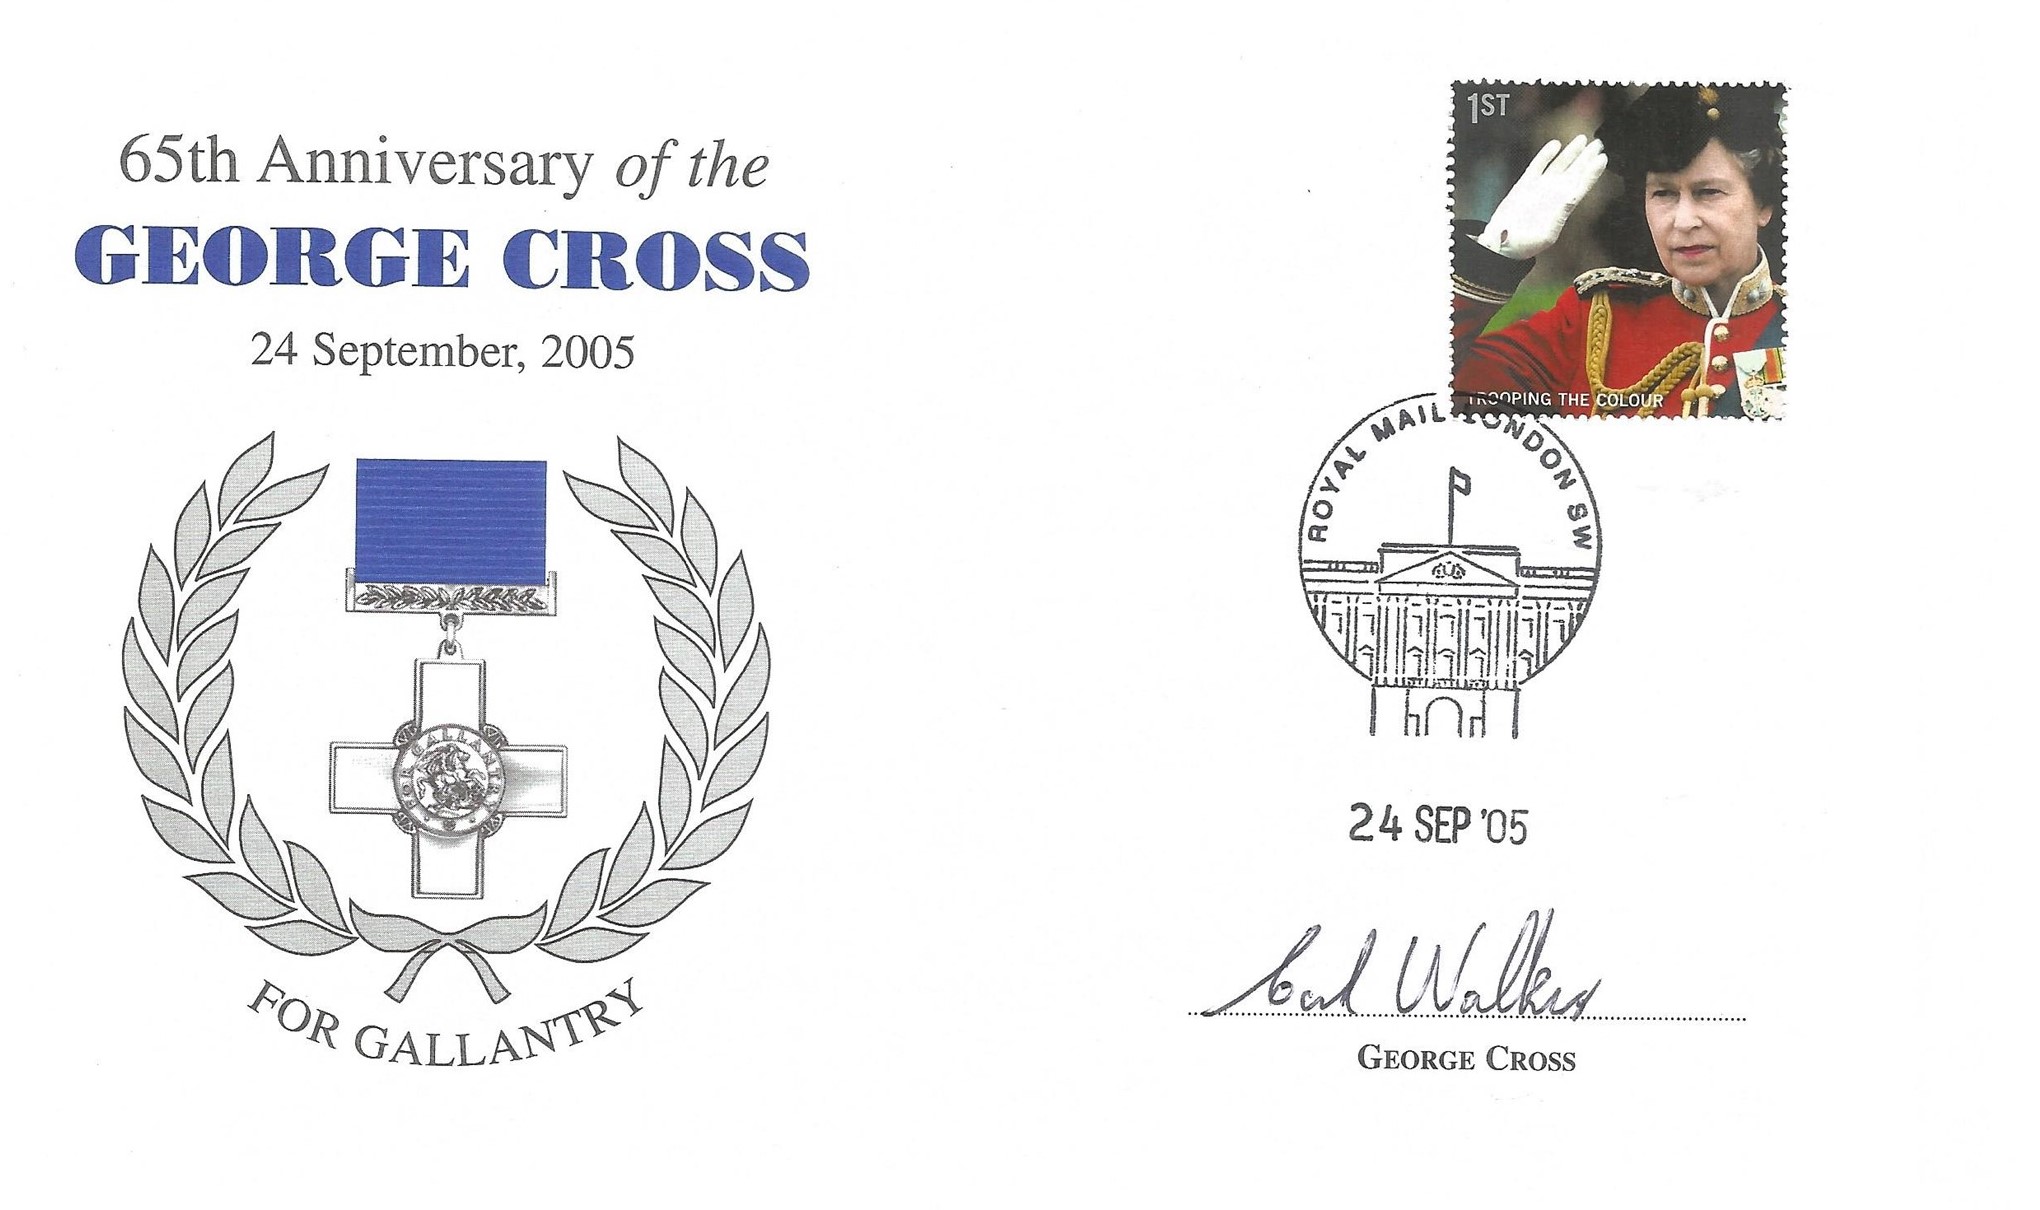 Carl Walker GC George Cross winner signed 2005 65th ann GC cover. Good condition. All autographs